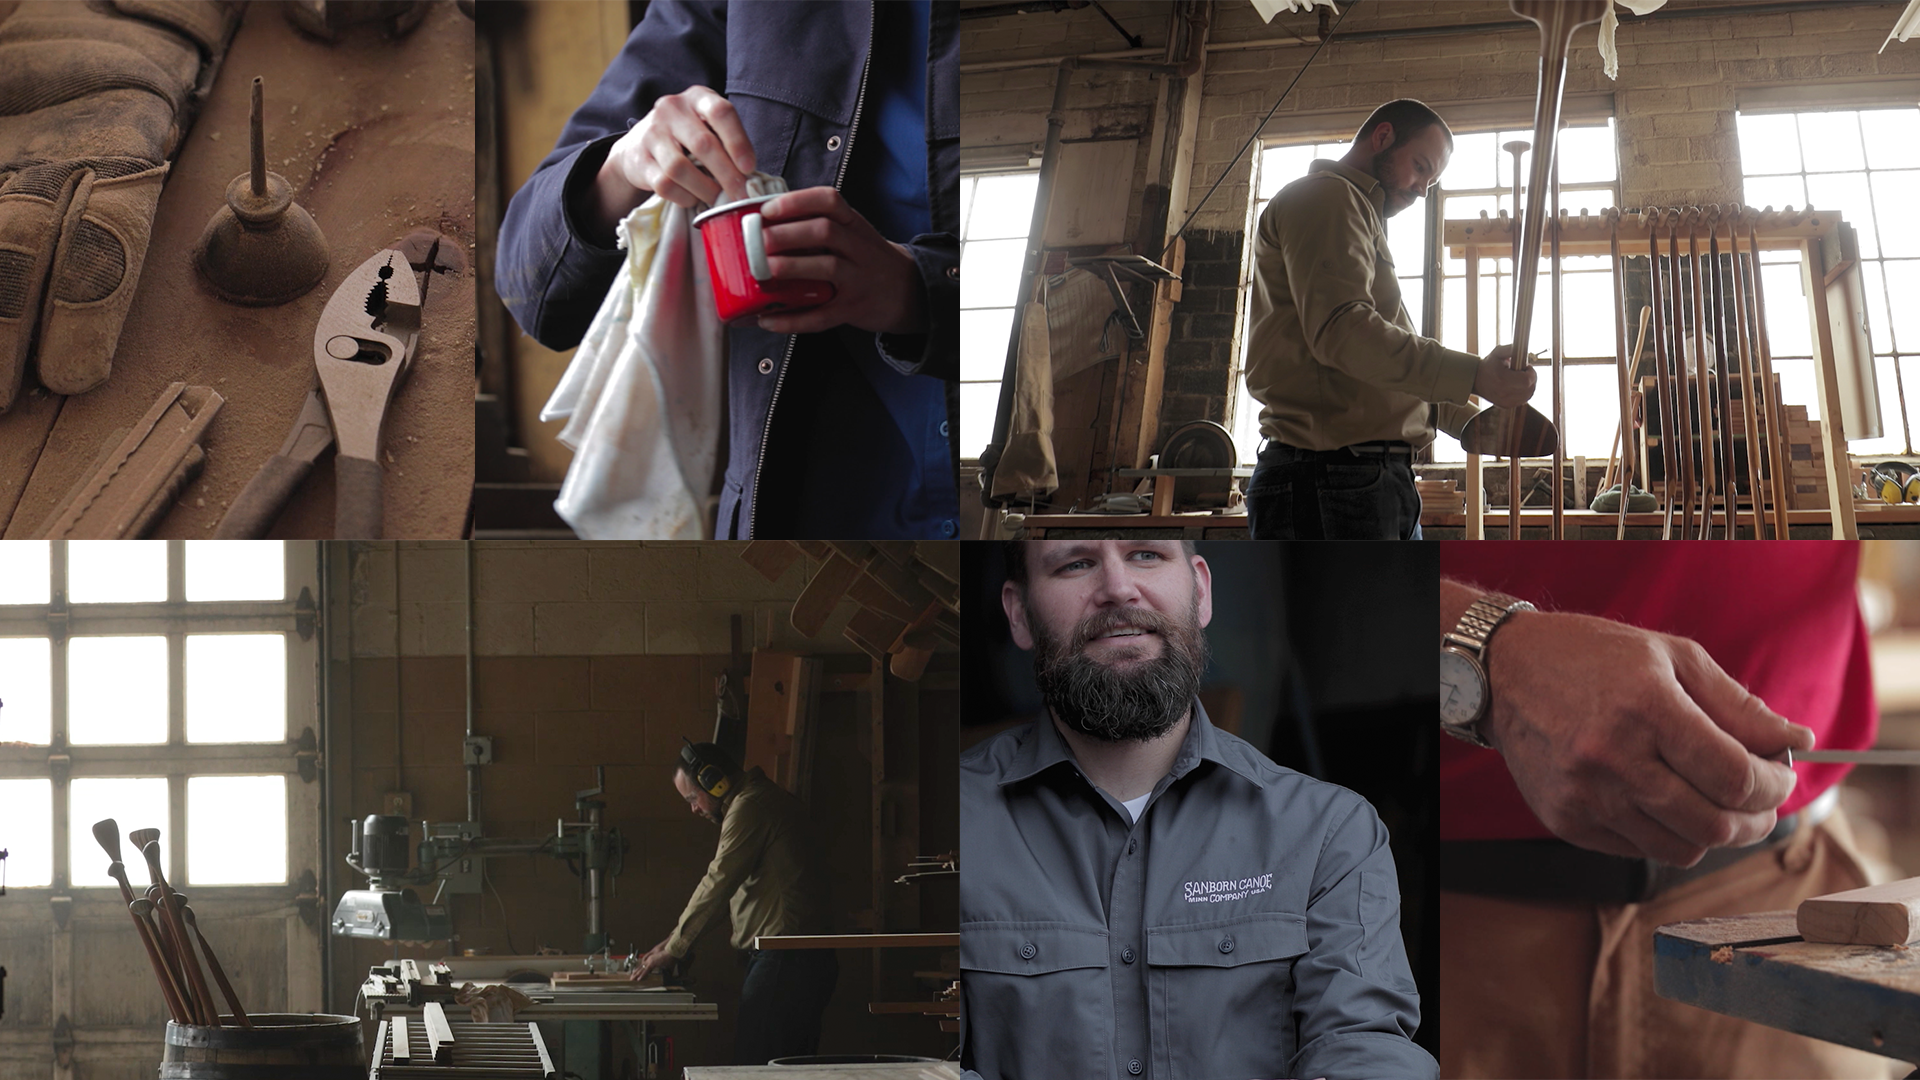 A collage of images from the Lands End Workwear video, featuring a worker measuring lumber, a worker crafting a canoe paddle, and a closeup of tools.